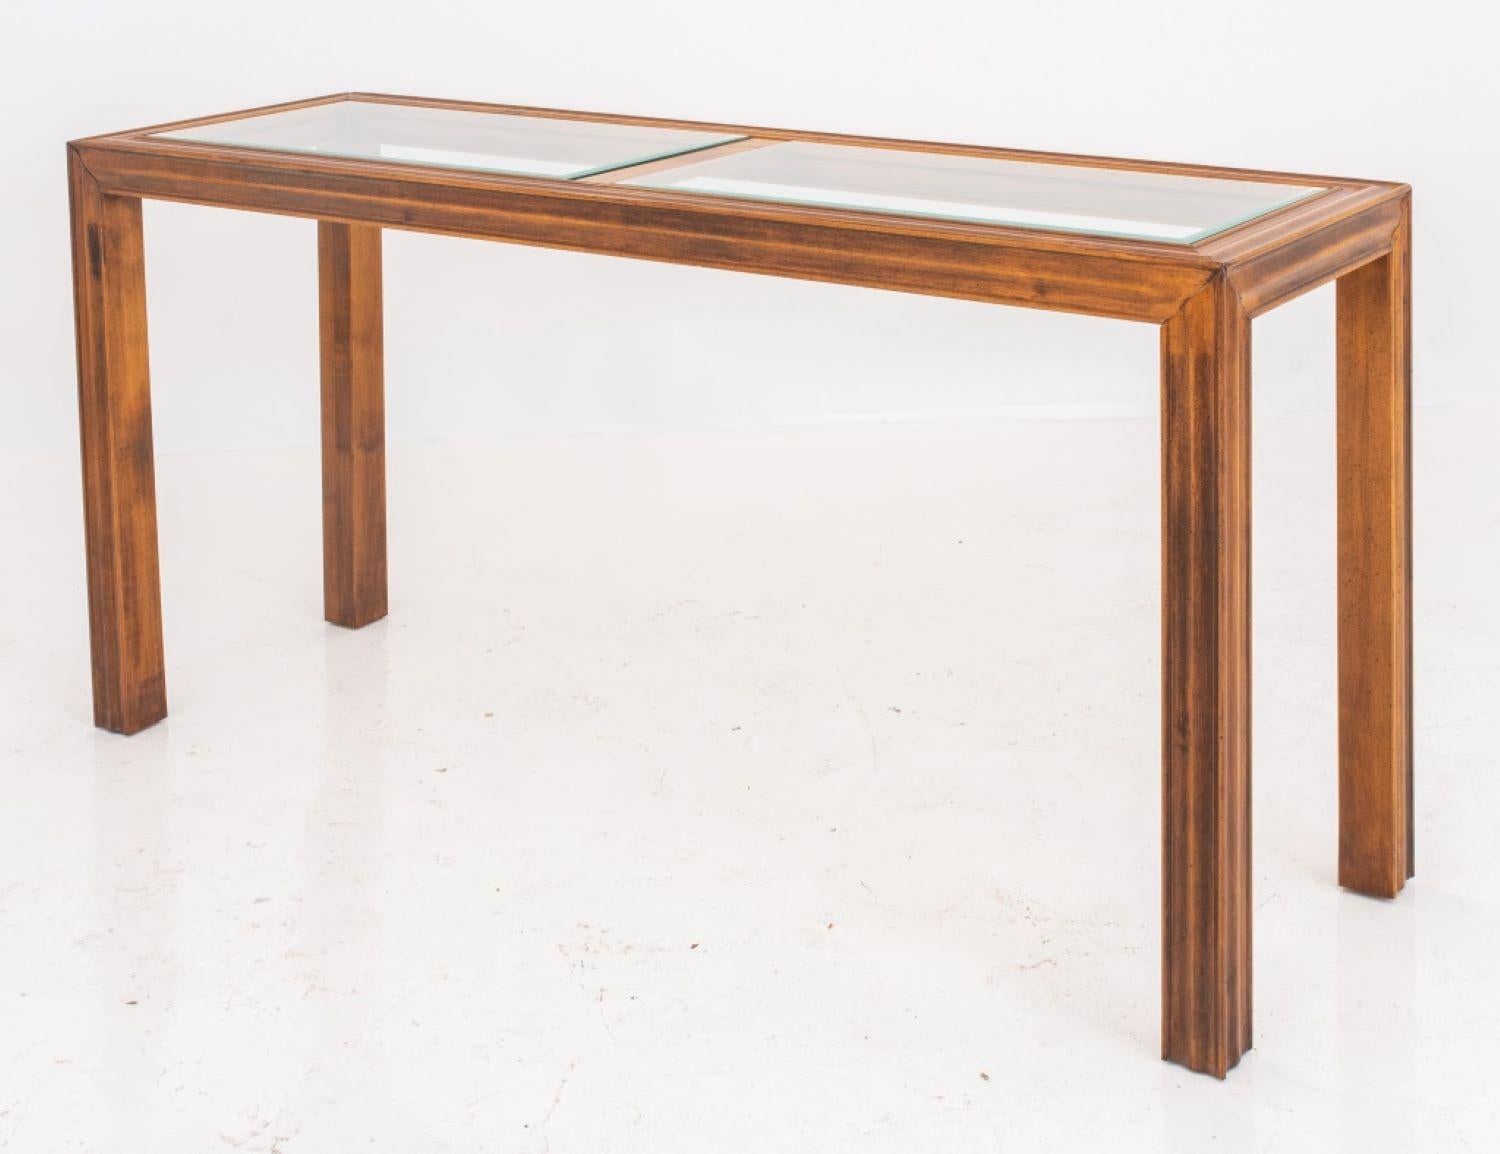 Late 20th Century Widdicomb Manner Modern Wood and Glass Table, 1980s For Sale